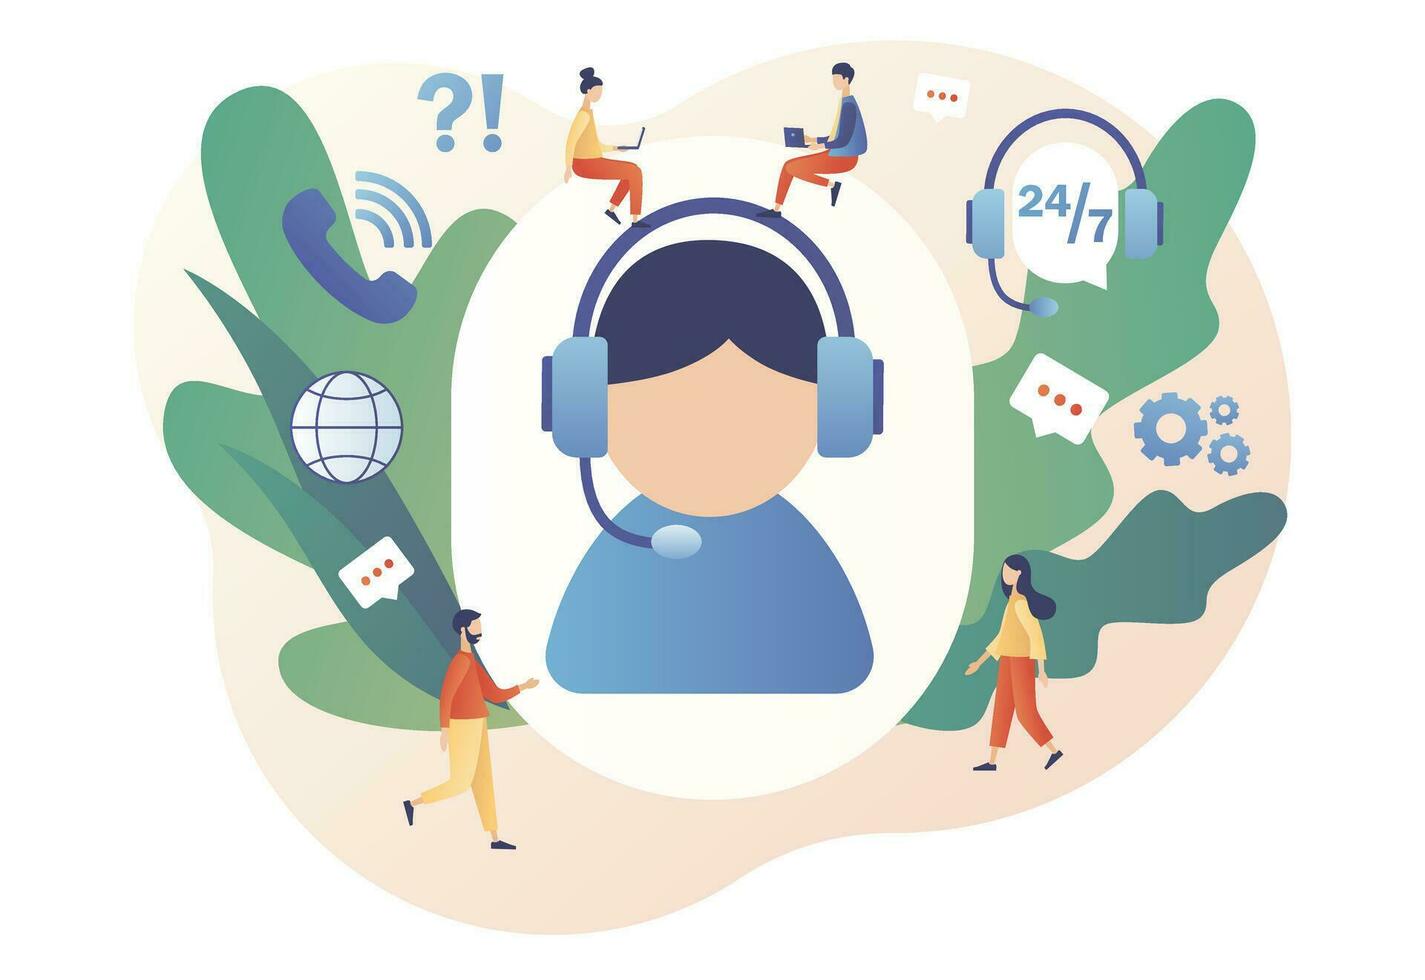 Call center. Online support concept. Customer service. Hotline operator in headset big sign consults client. Modern flat cartoon style. Vector illustration on white background